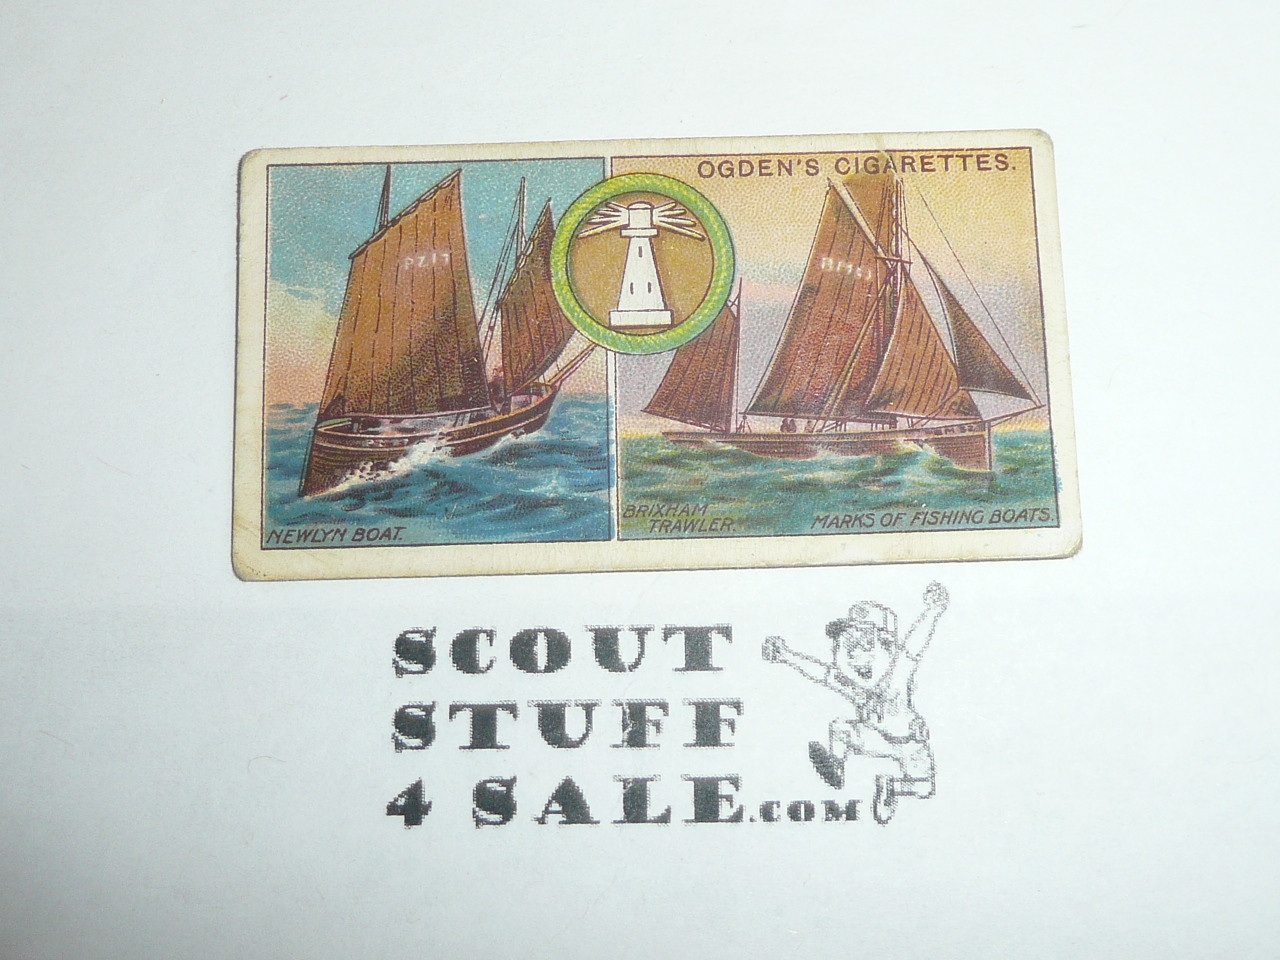 Ogden Tabacco Company Premium Card, Fourth Boy Scout Series of 50, Card #169 Marks of Fishing BoatsBoats, 1913